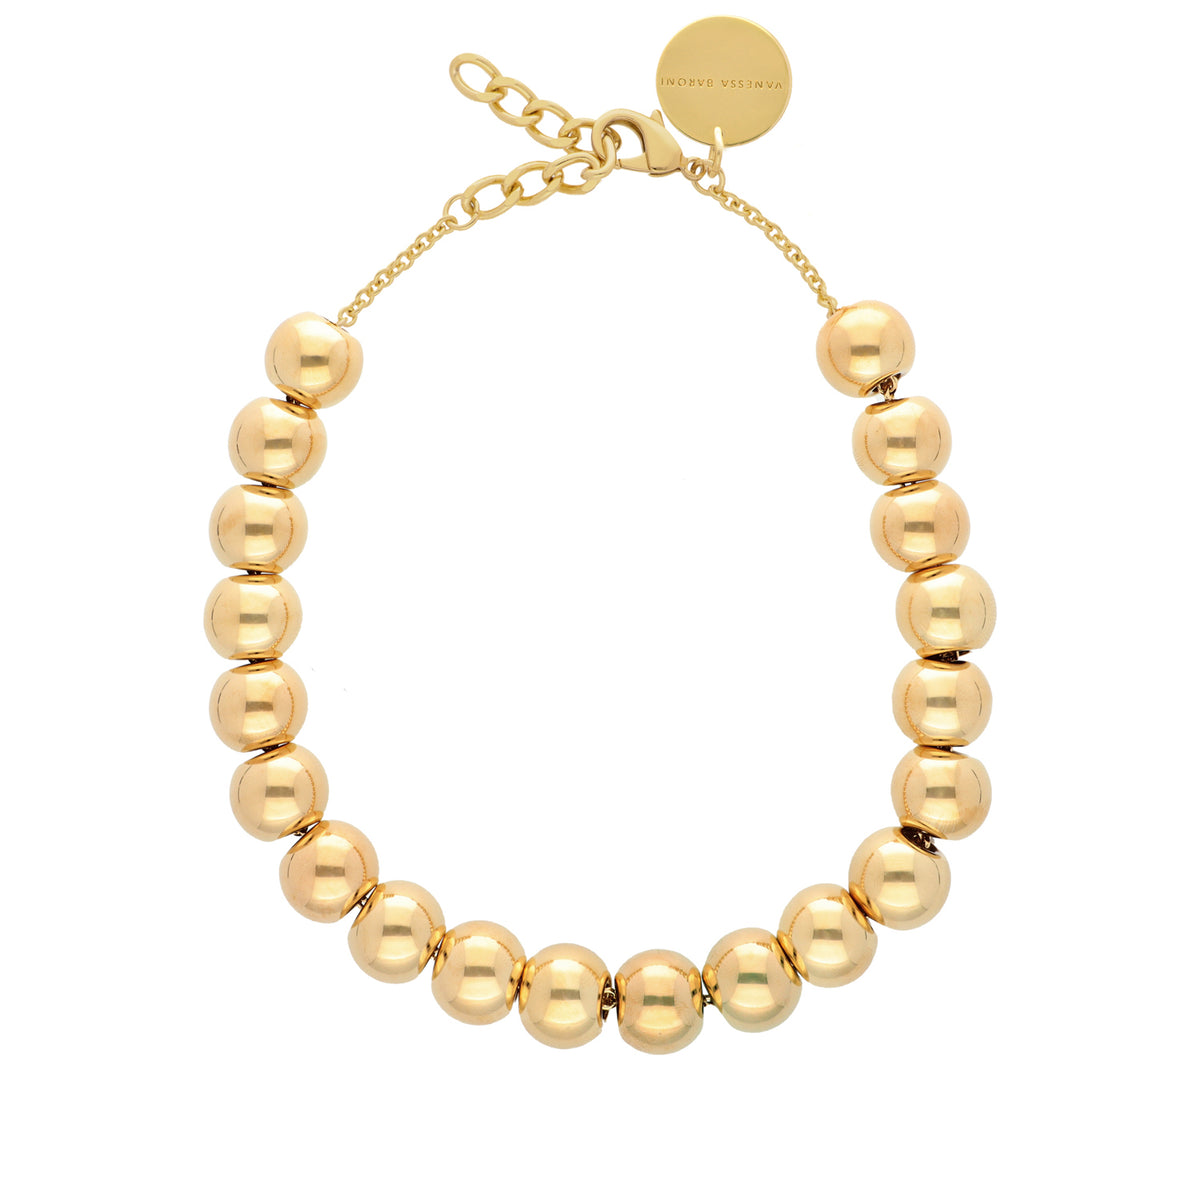 Small Beads Necklace Short Gold